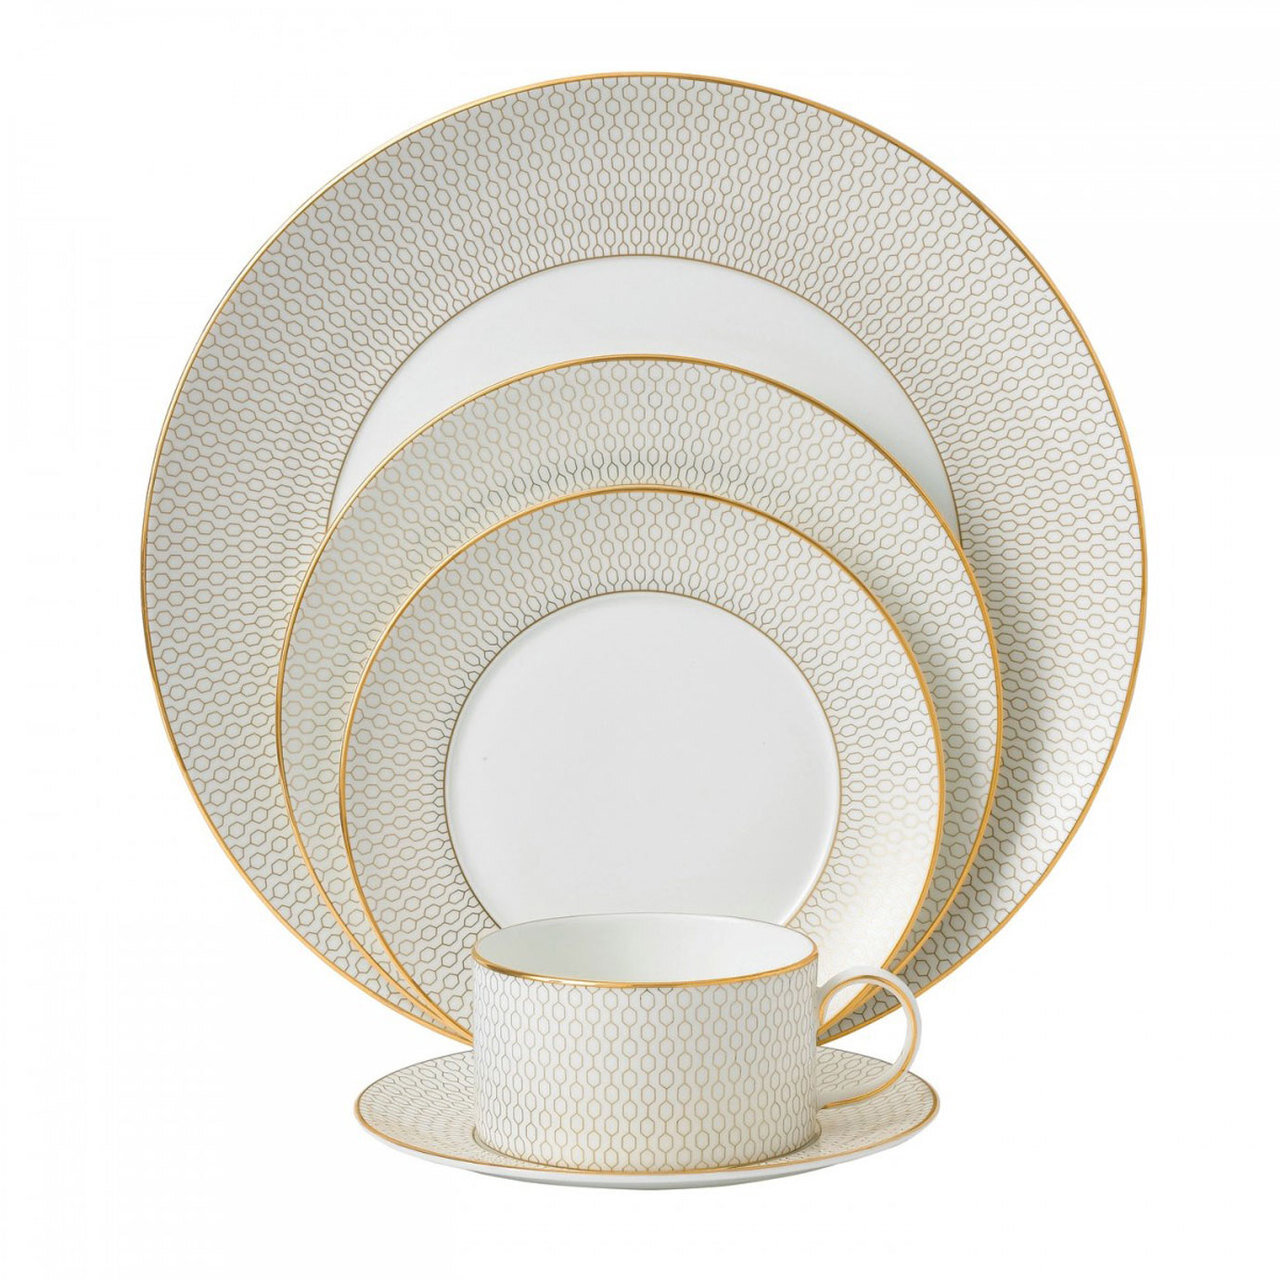 Wedgwood Arris Five 5 Piece Place Setting